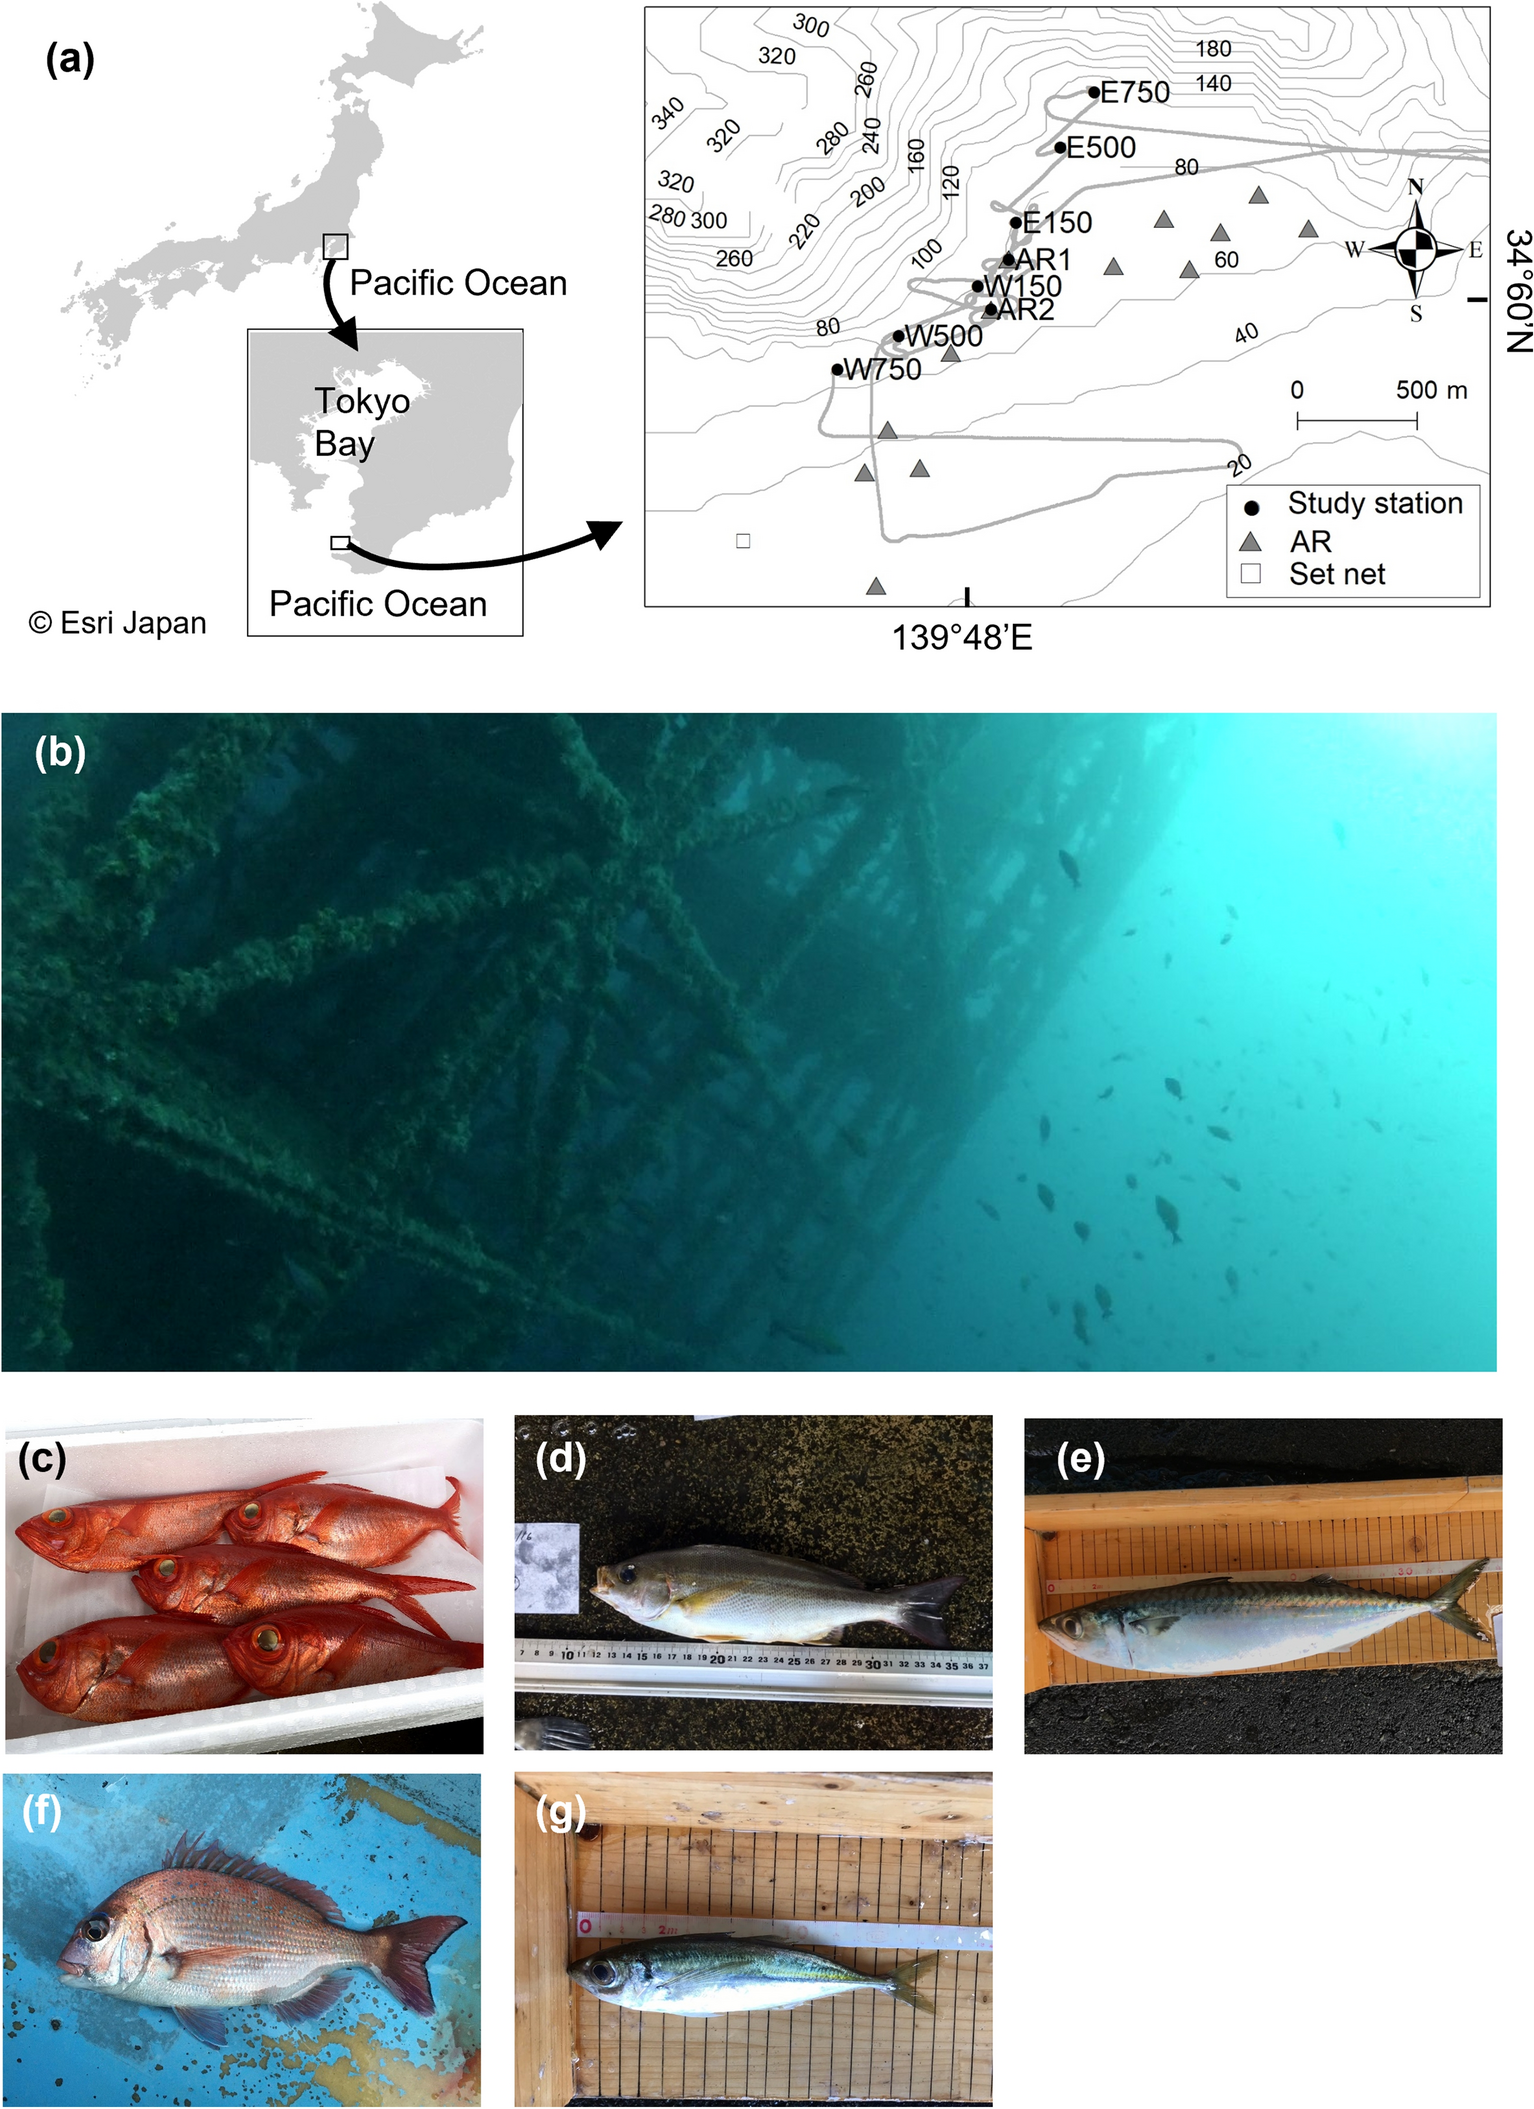 Quantitative assessment of multiple fish species around artificial reefs  combining environmental DNA metabarcoding and acoustic survey